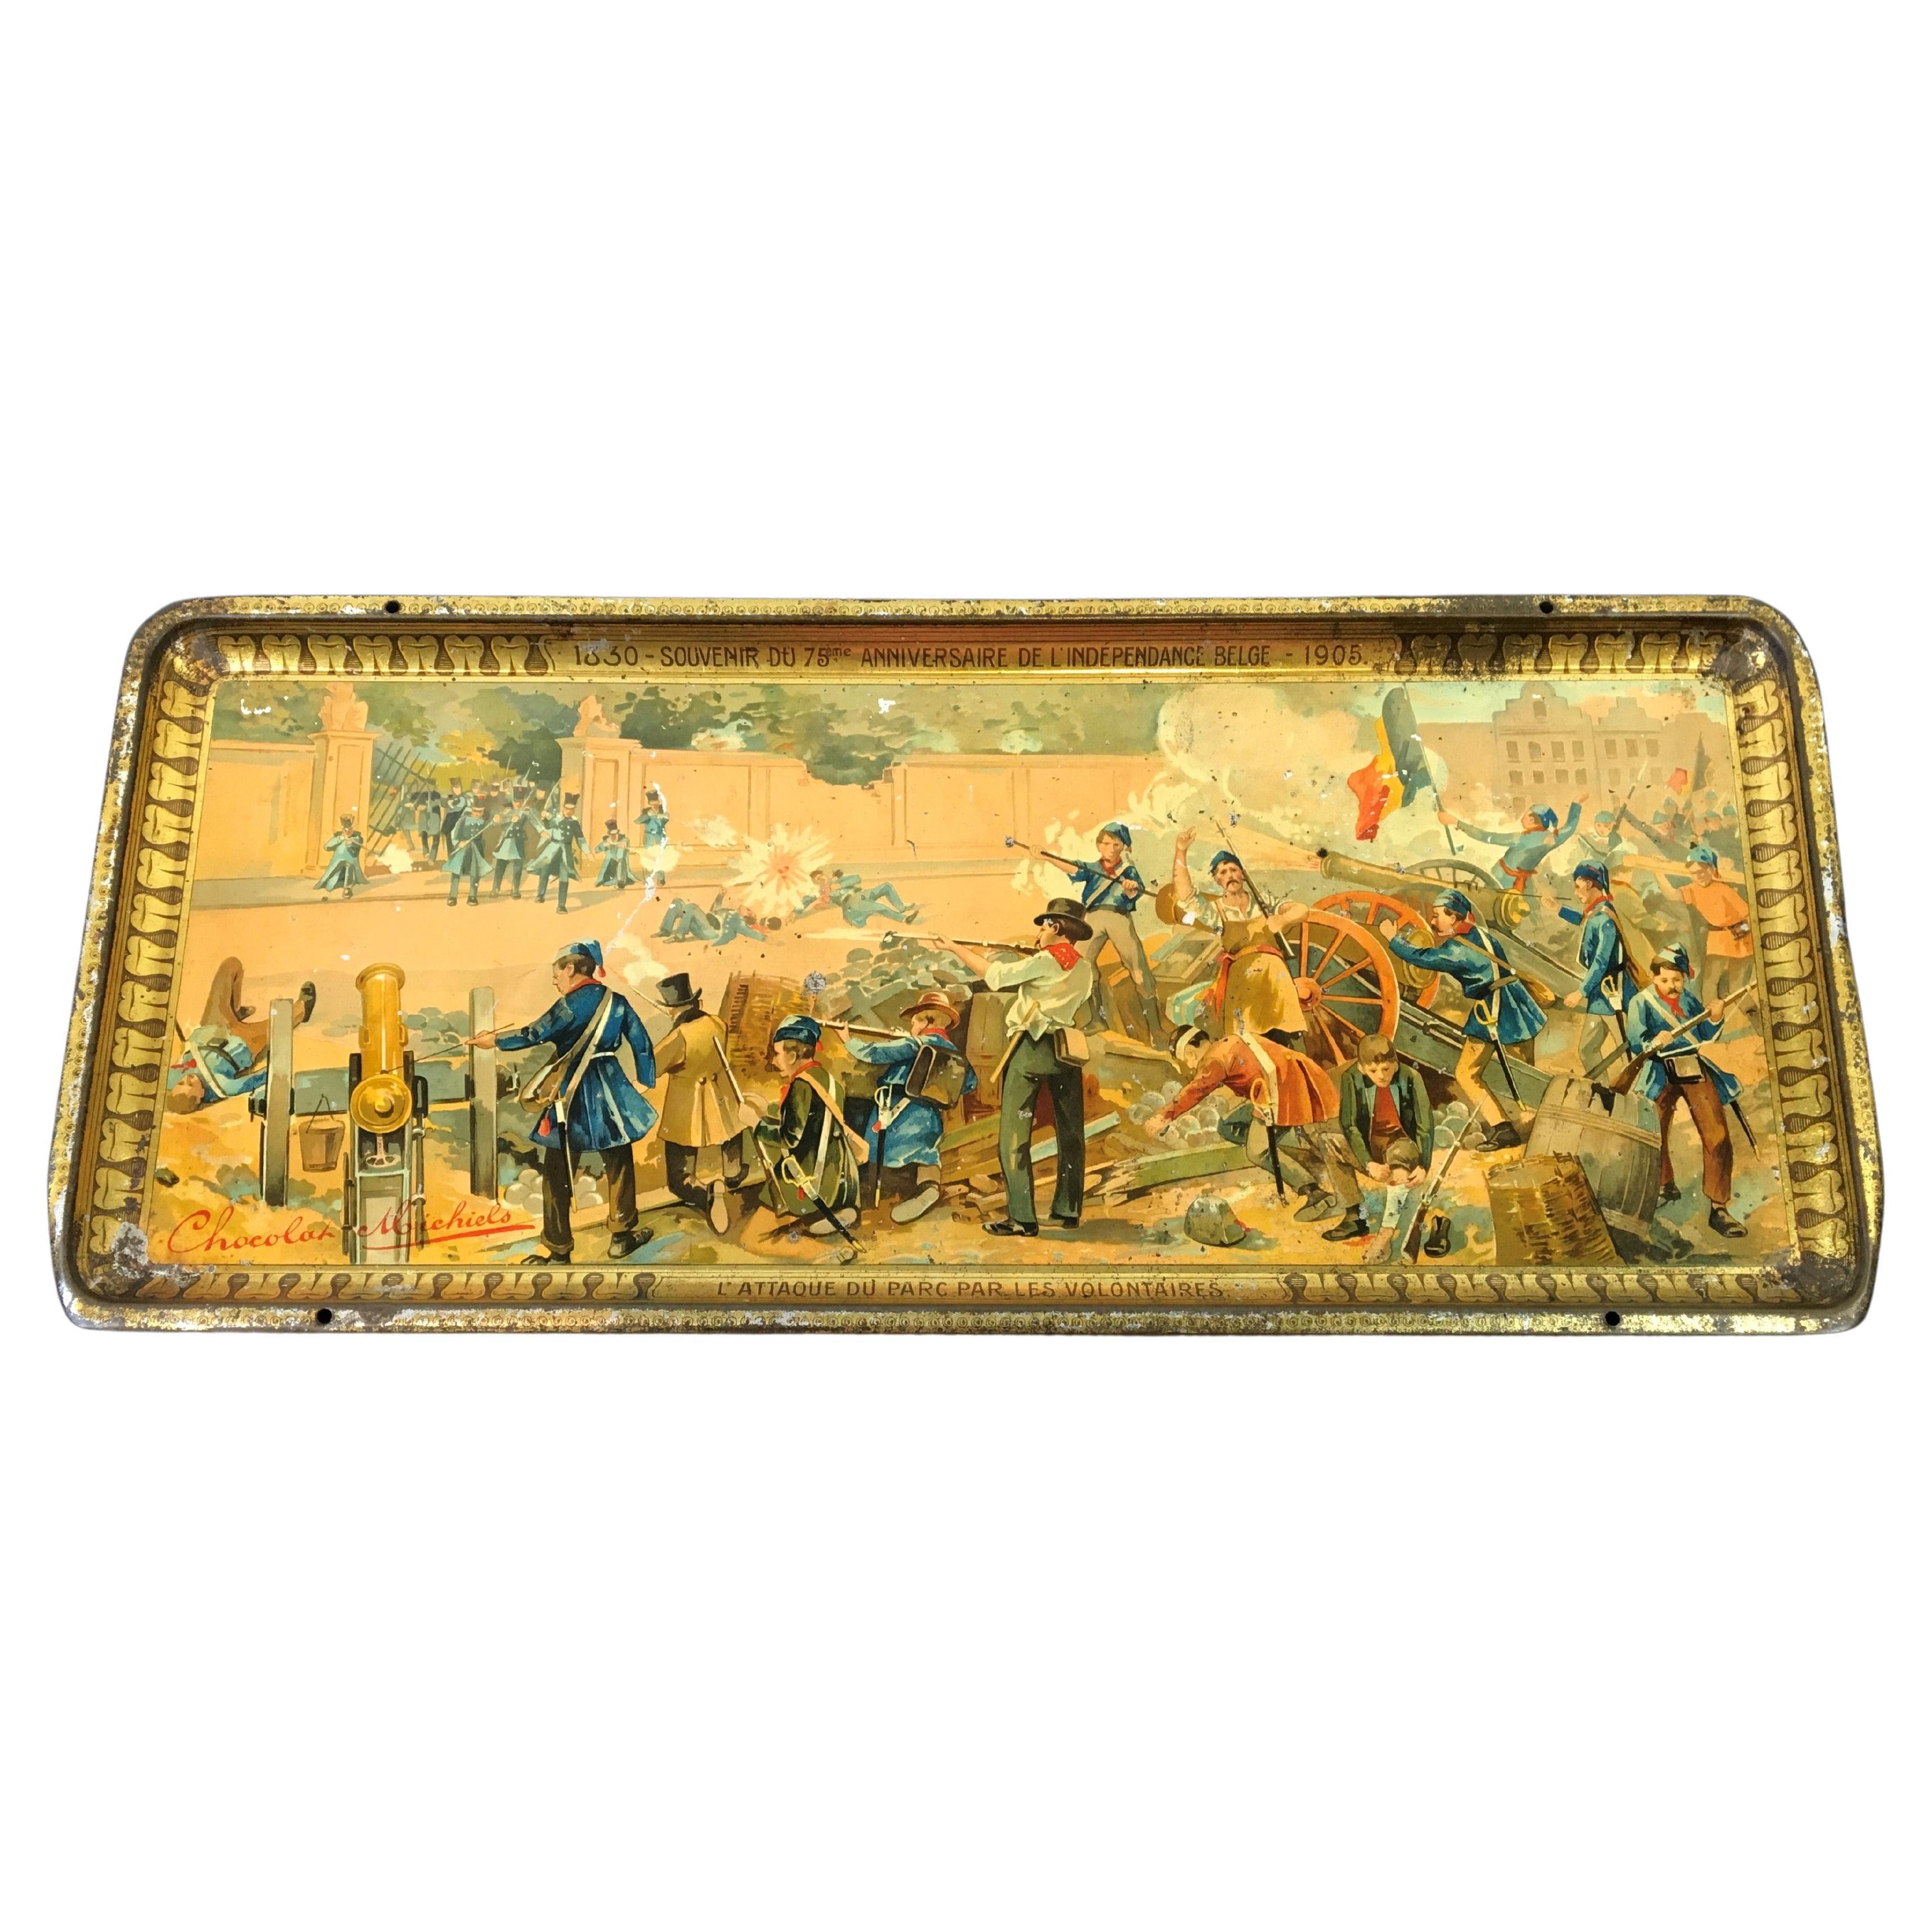 Antique Tray Chocolate Michiels- 1905 - 75 years Independence Belgium For Sale